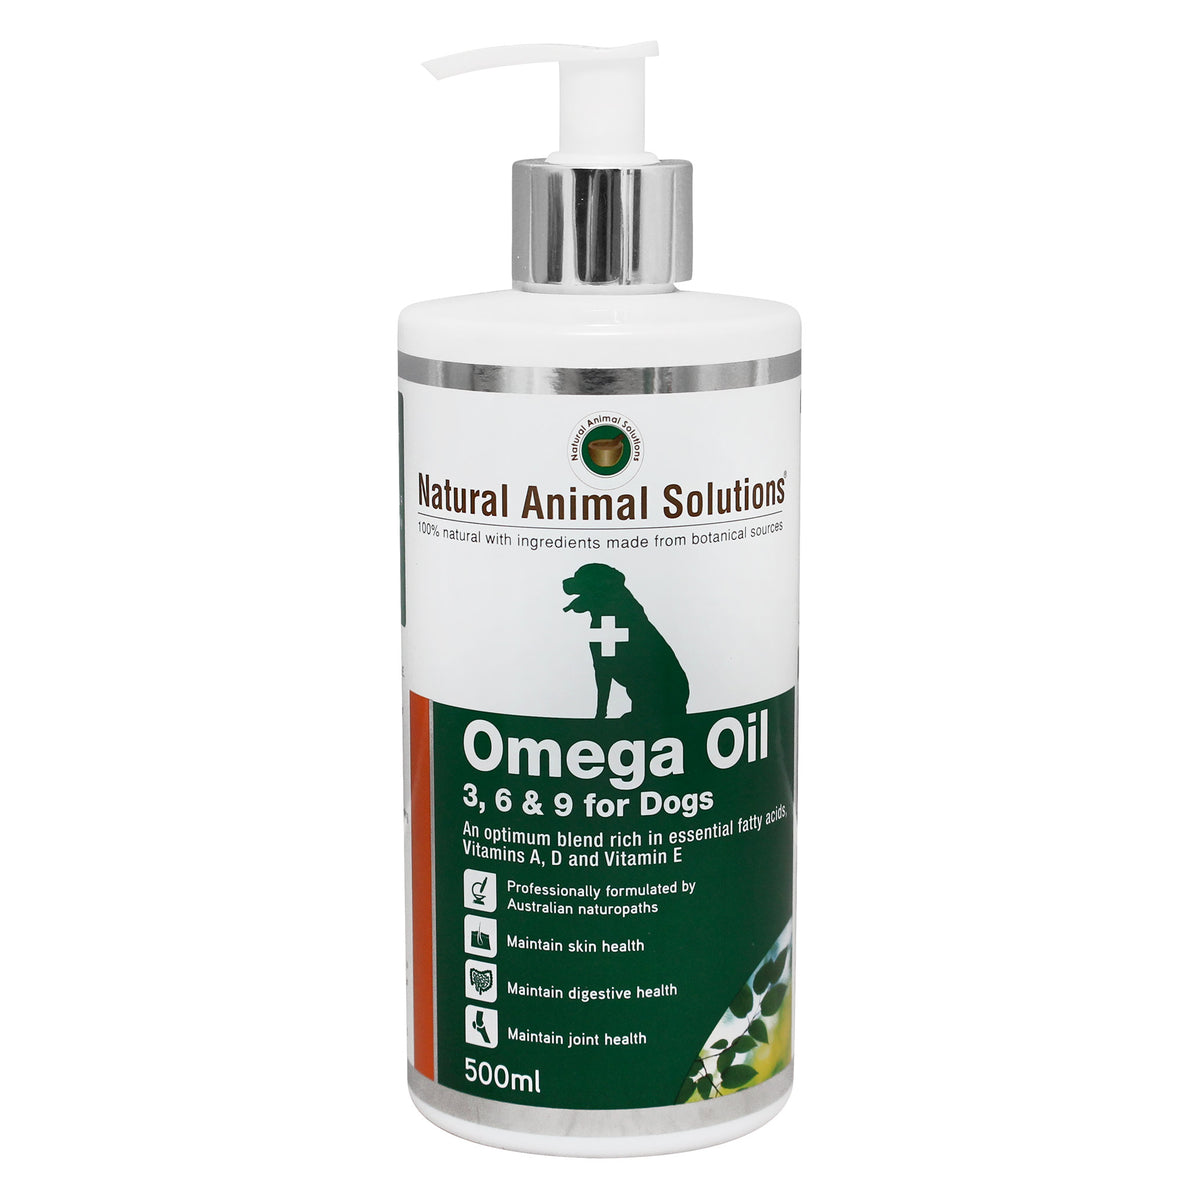 Natural Animal Solutions Omega 3, 6 &amp; 9 Oil for Dogs and Horses